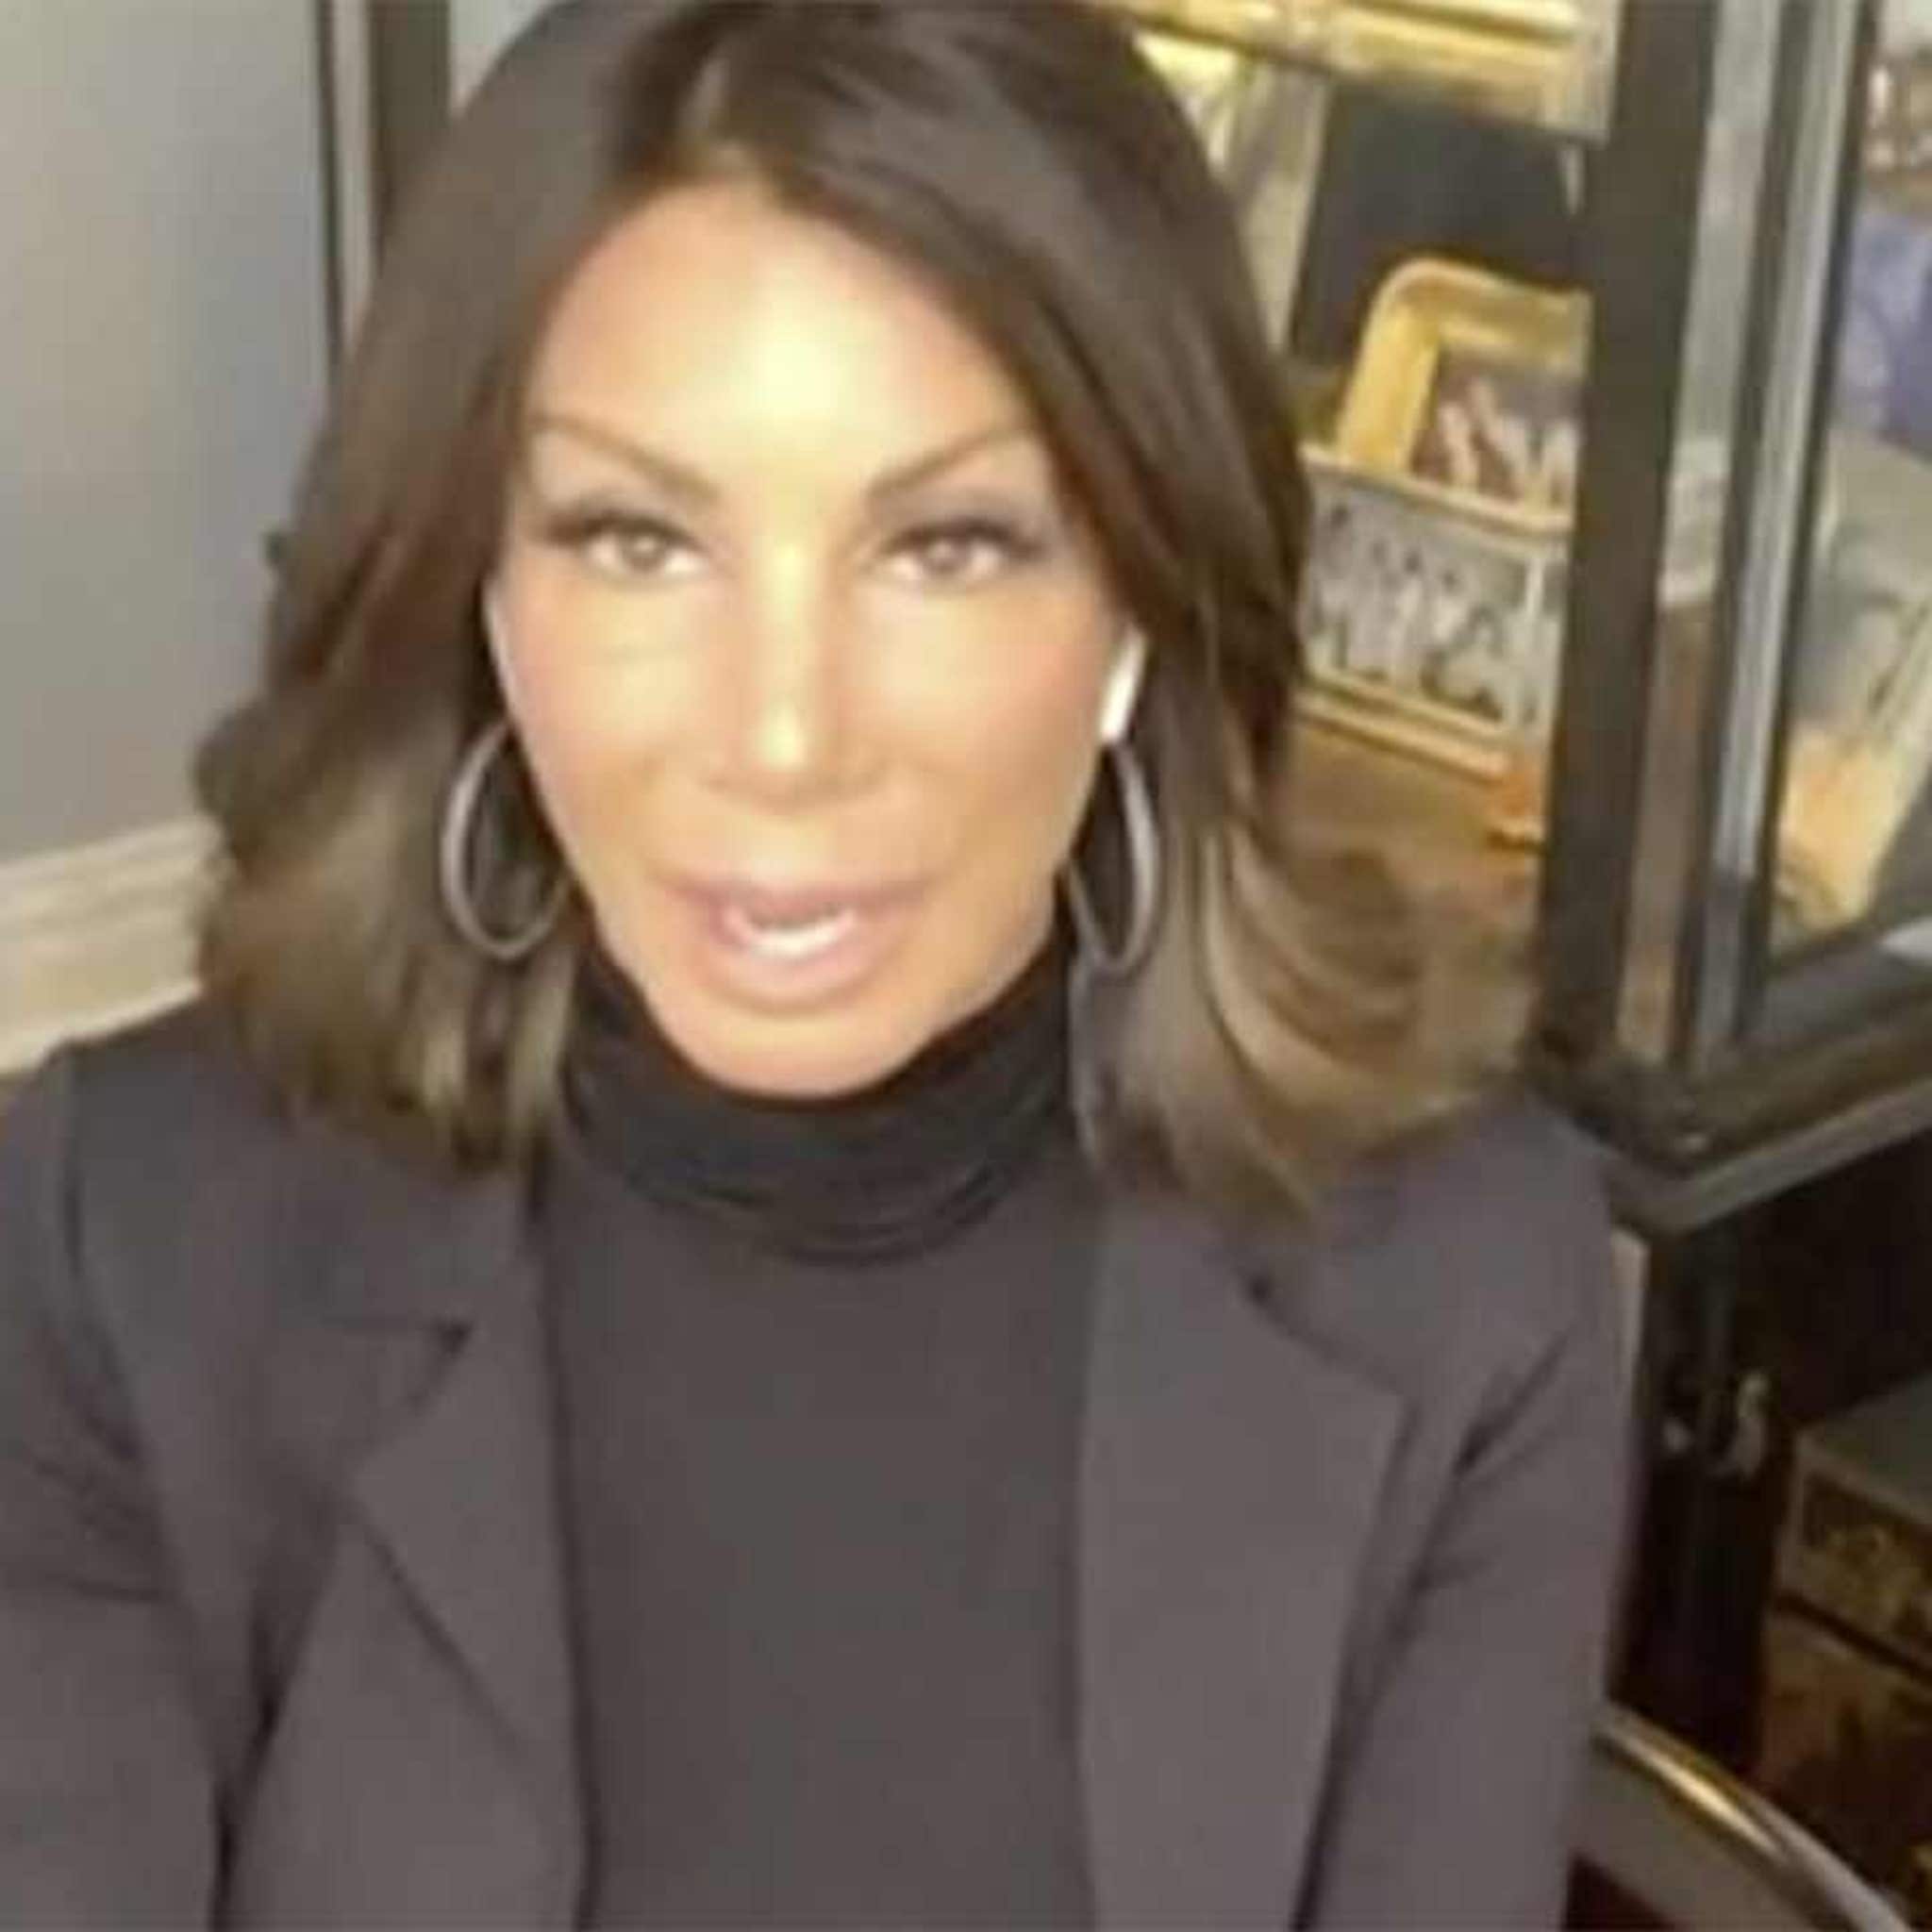 RHONJ Danielle Staub Says Shes Leaving Real Housewives